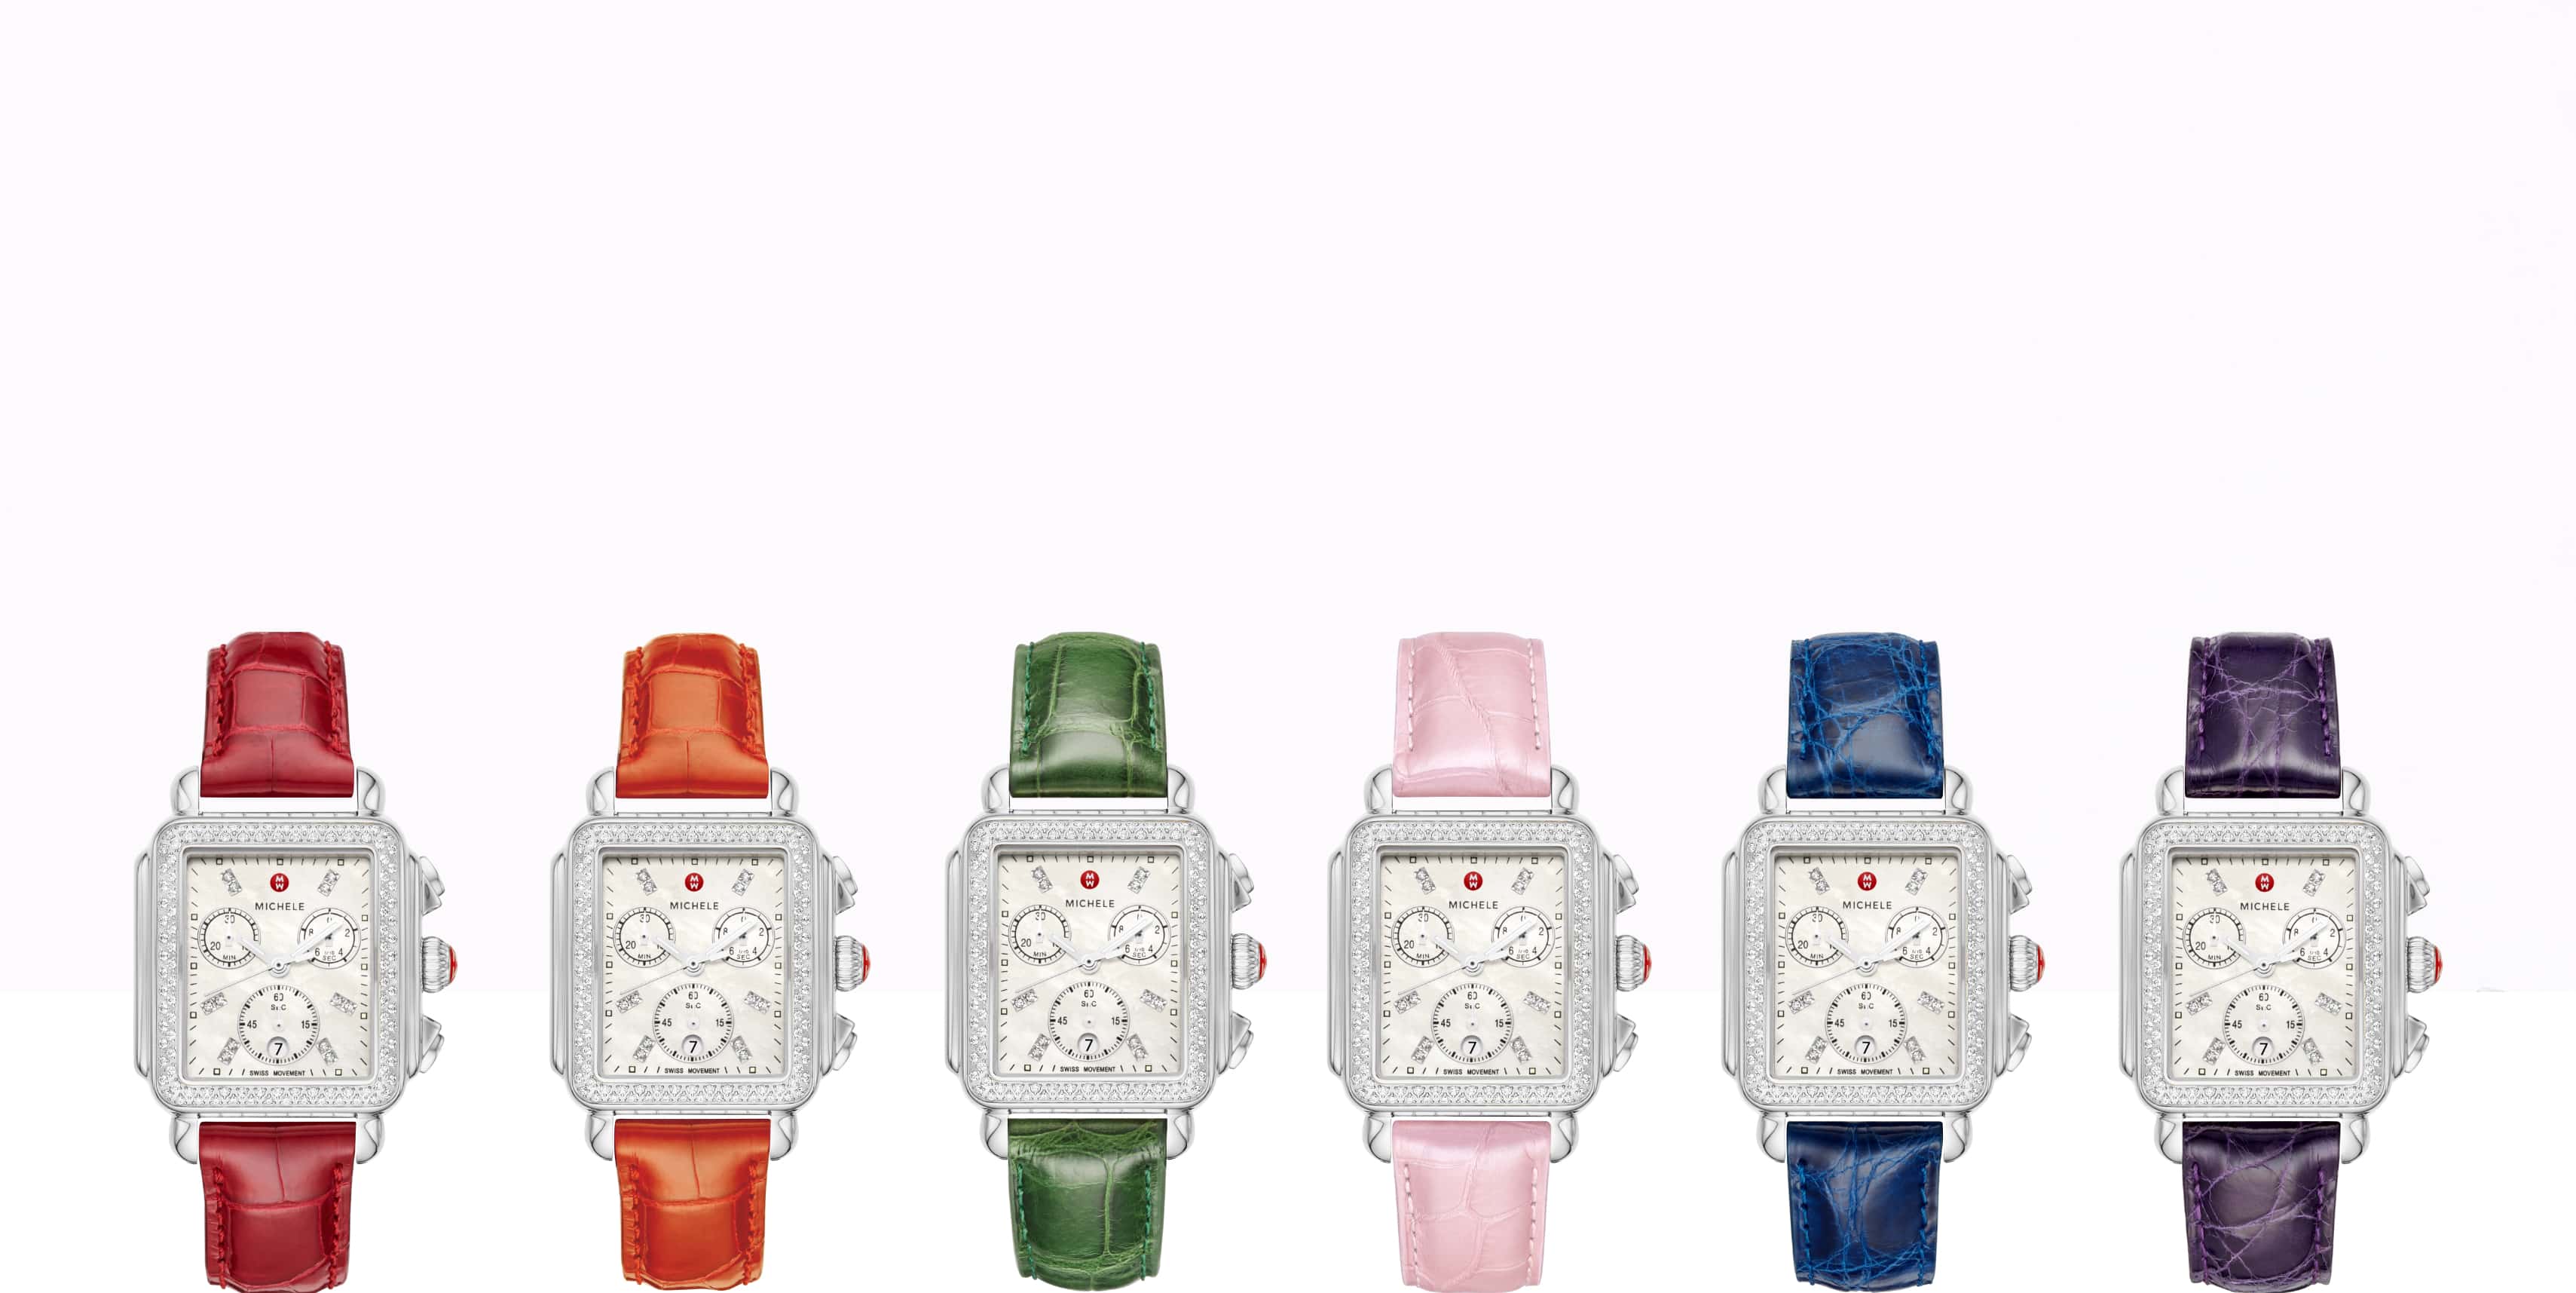 Stainless Deco watches with colorful leather straps in red, orange, green, pink, blue and purple. 